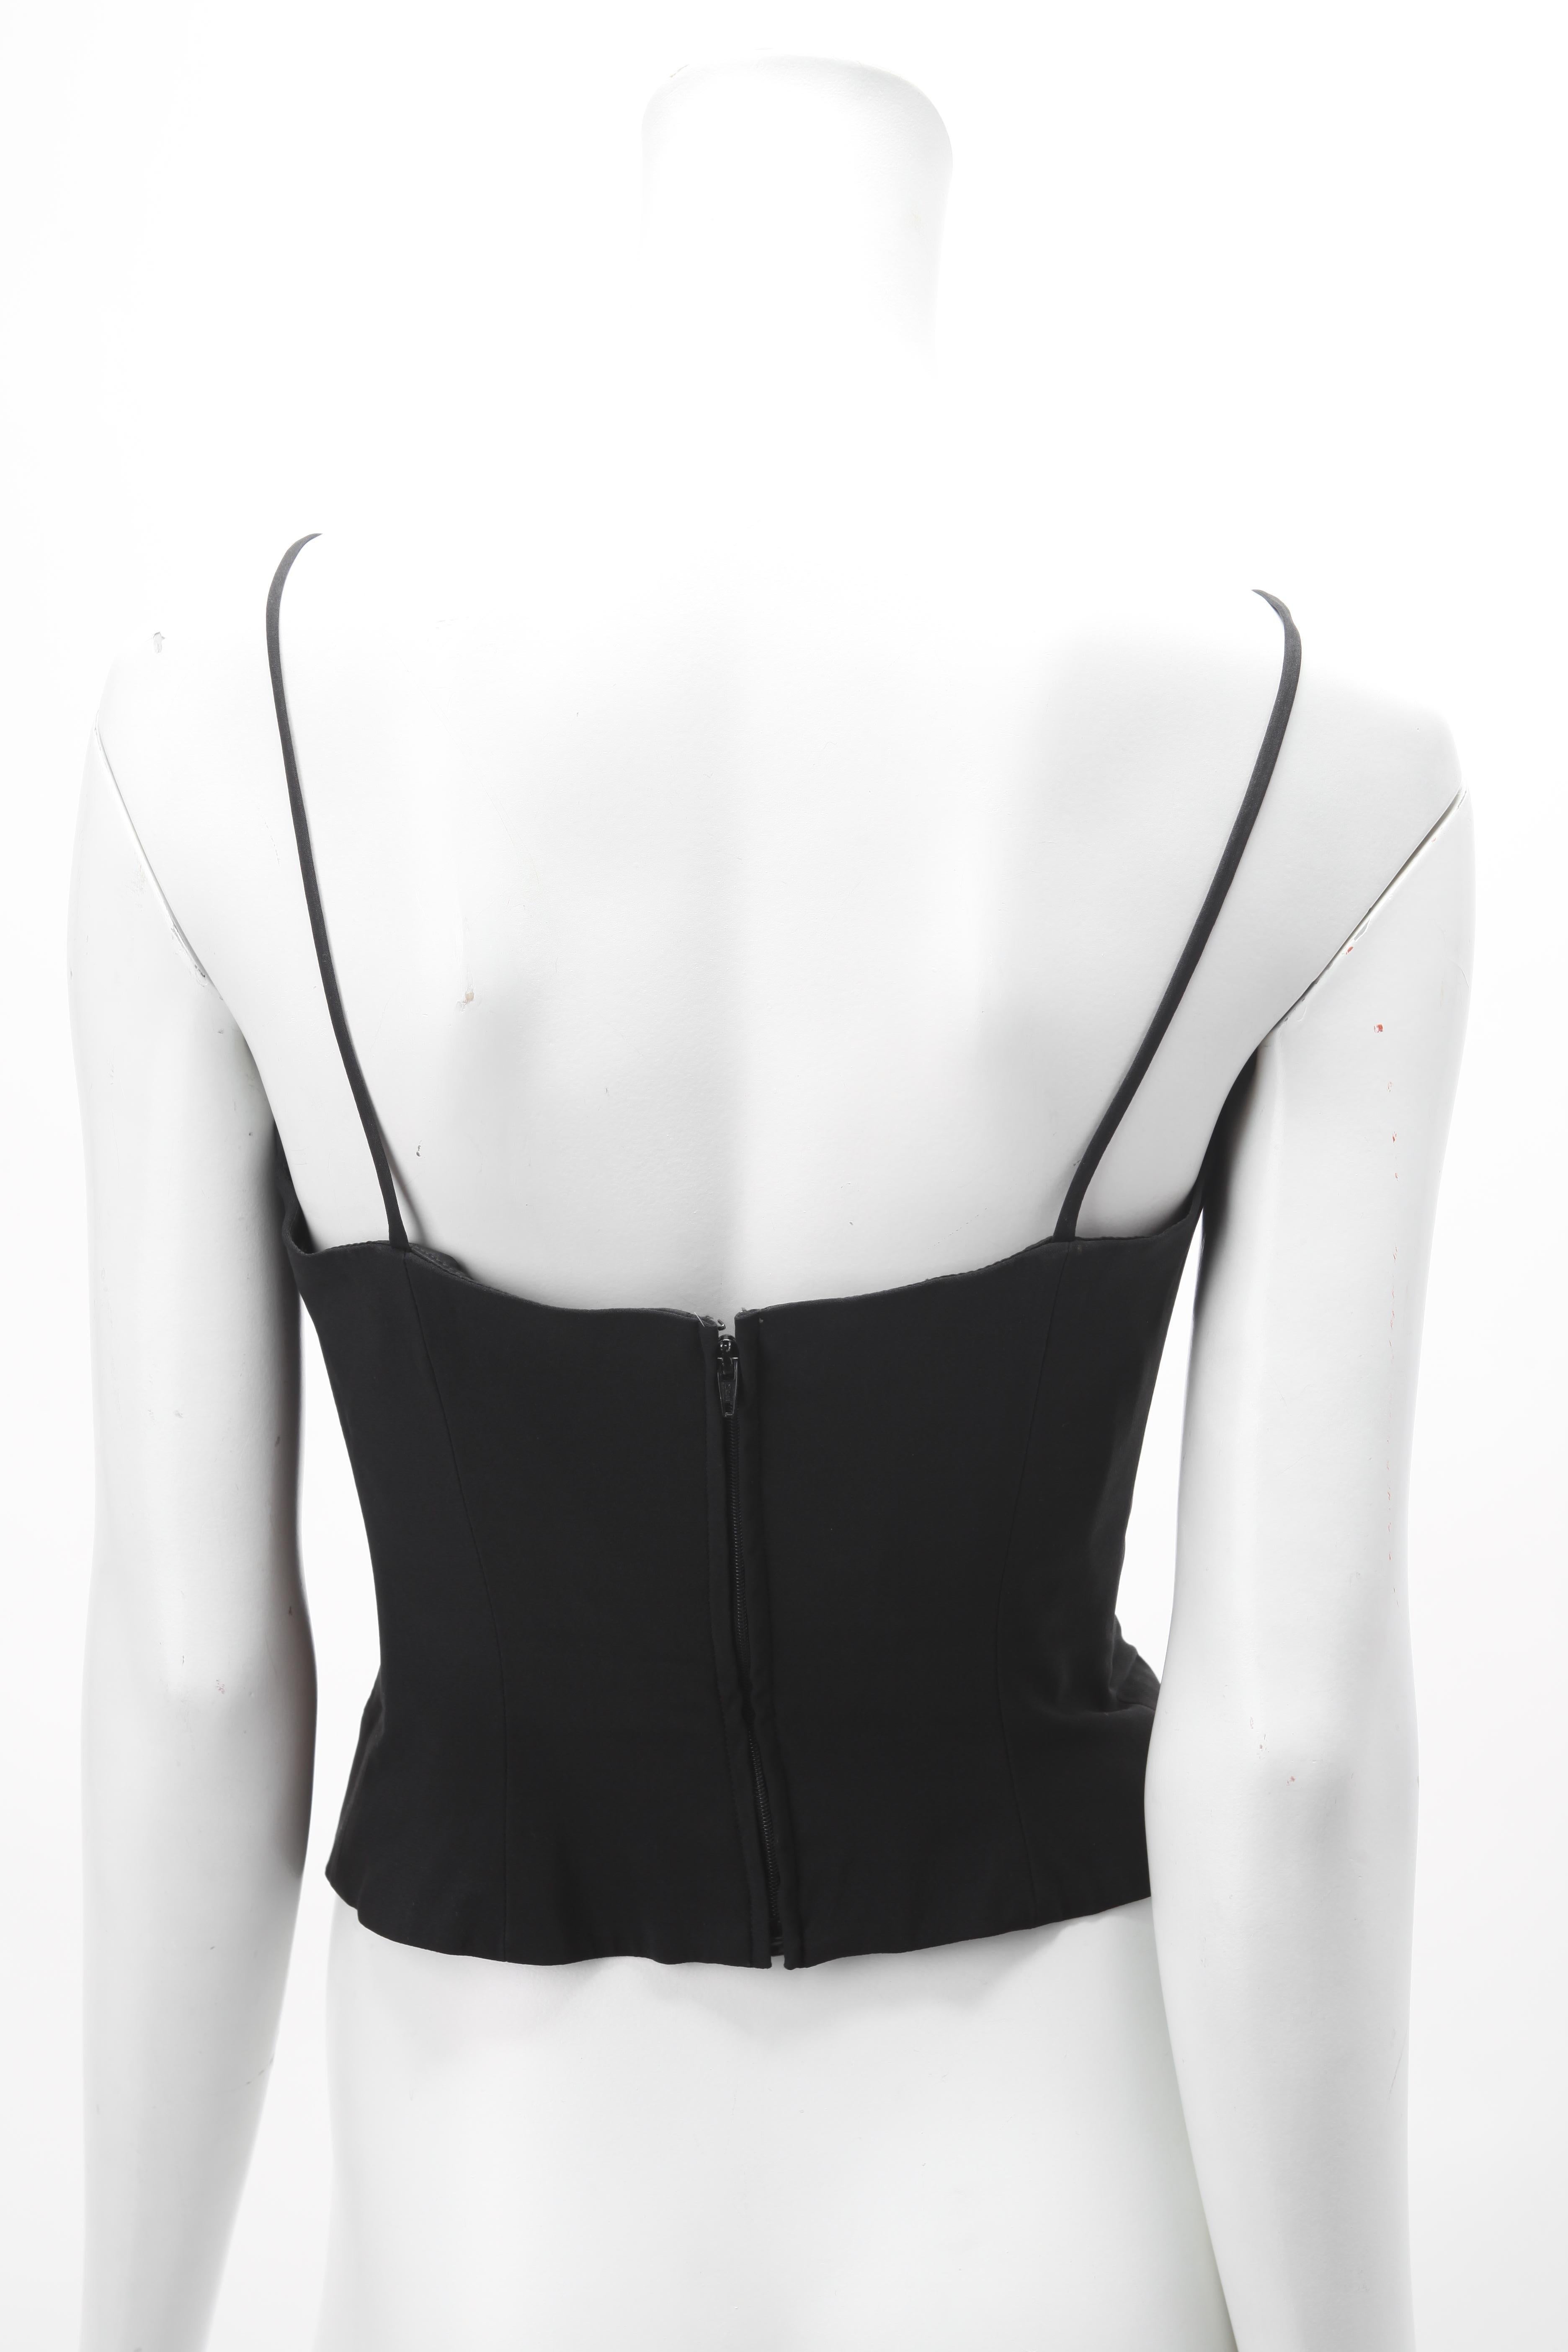 Women's Rare S/S 1990 Moschino Couture Vintage Eyes Bustier Corset Top 